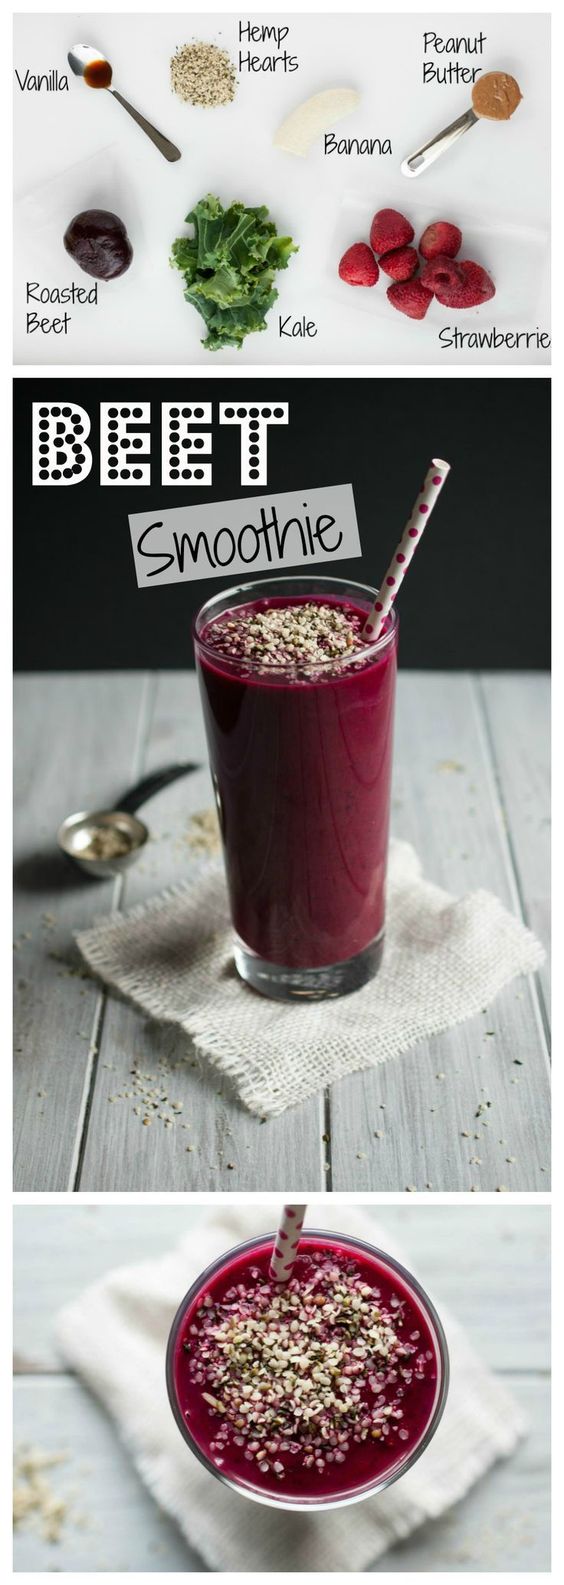 Find more info about this beet smoothie and other healthy breakfast smoothies in this health guide. Discover how balanced breakfast smoothie recipes can benefit your health in the long term. #healthyeating #healthyliving #nutrition #wellness #healthyrecipes #healthymeals #healthyhabits #healthyeating